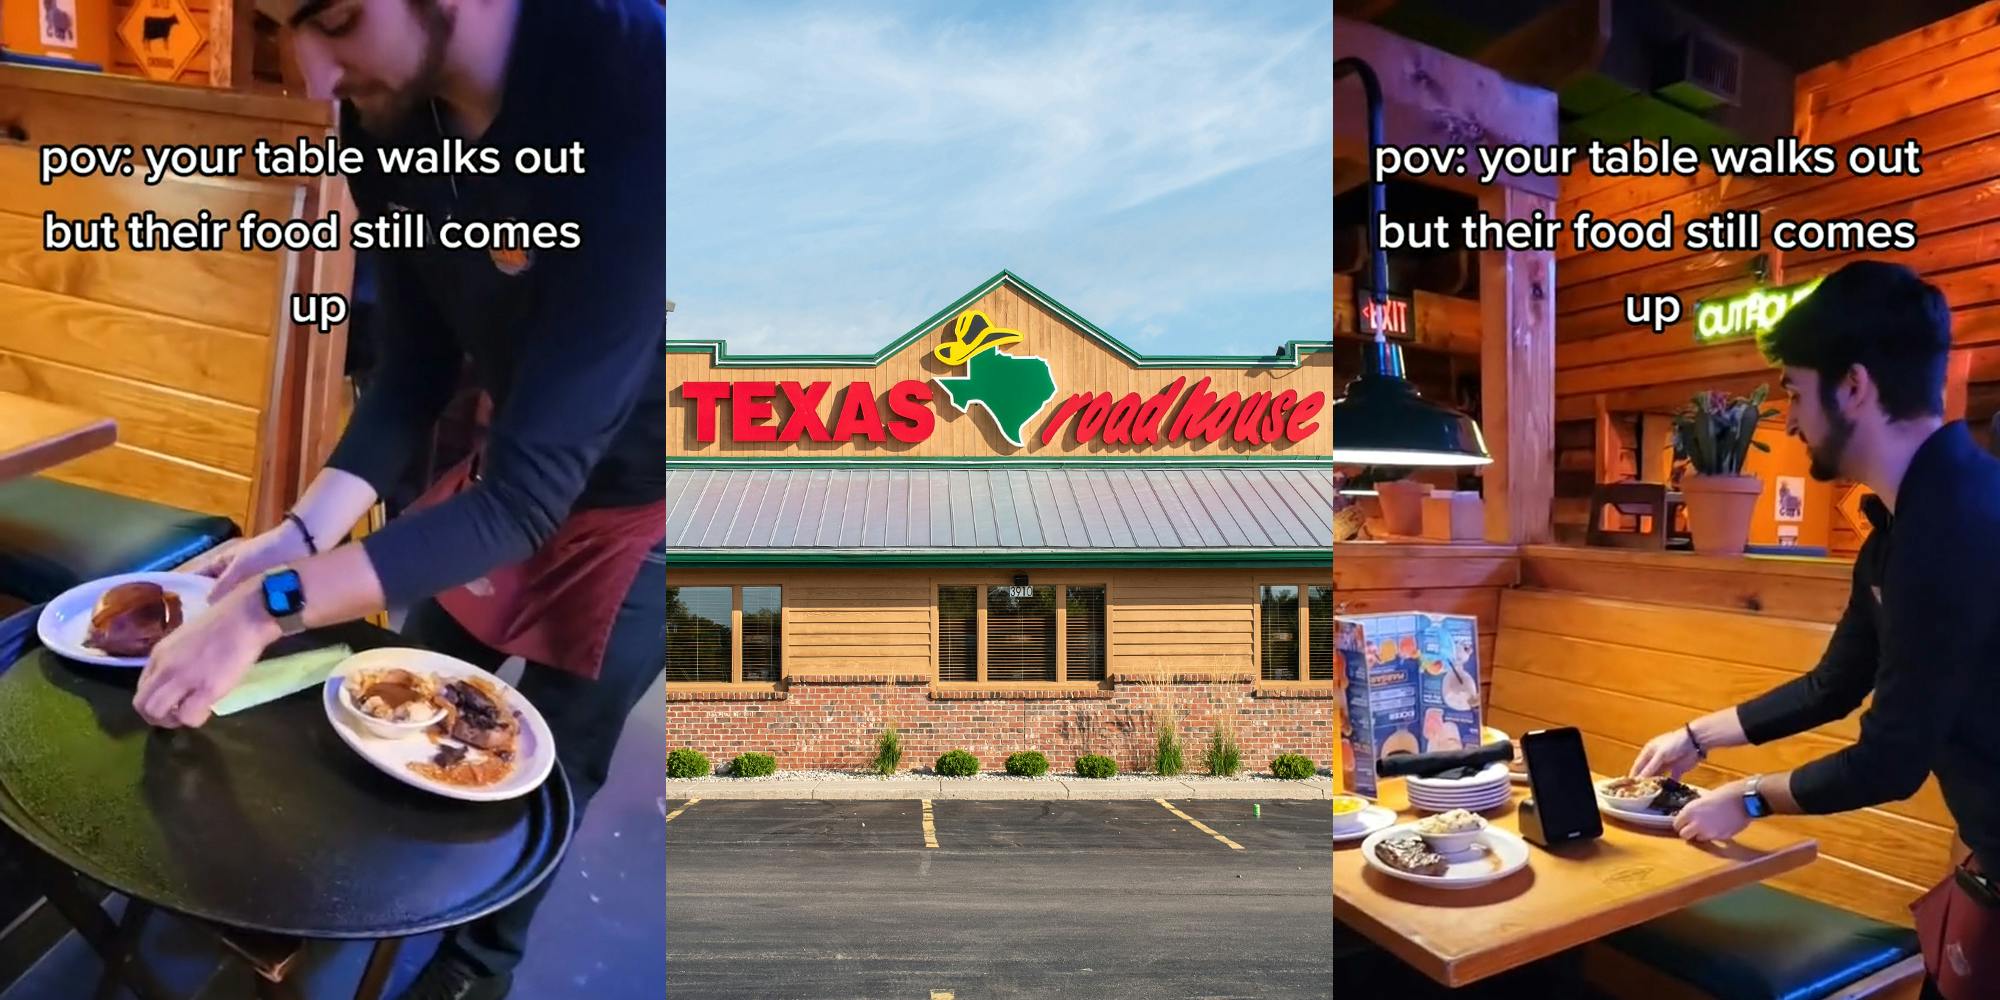 server grabbing plate of food next to table caption "pov: your table walks out but their food still comes up" (l) Texas Roadhouse building with sign and parking lot (c) server placing plate of food on table caption "pov: your table walks out but their food still comes up" (r)